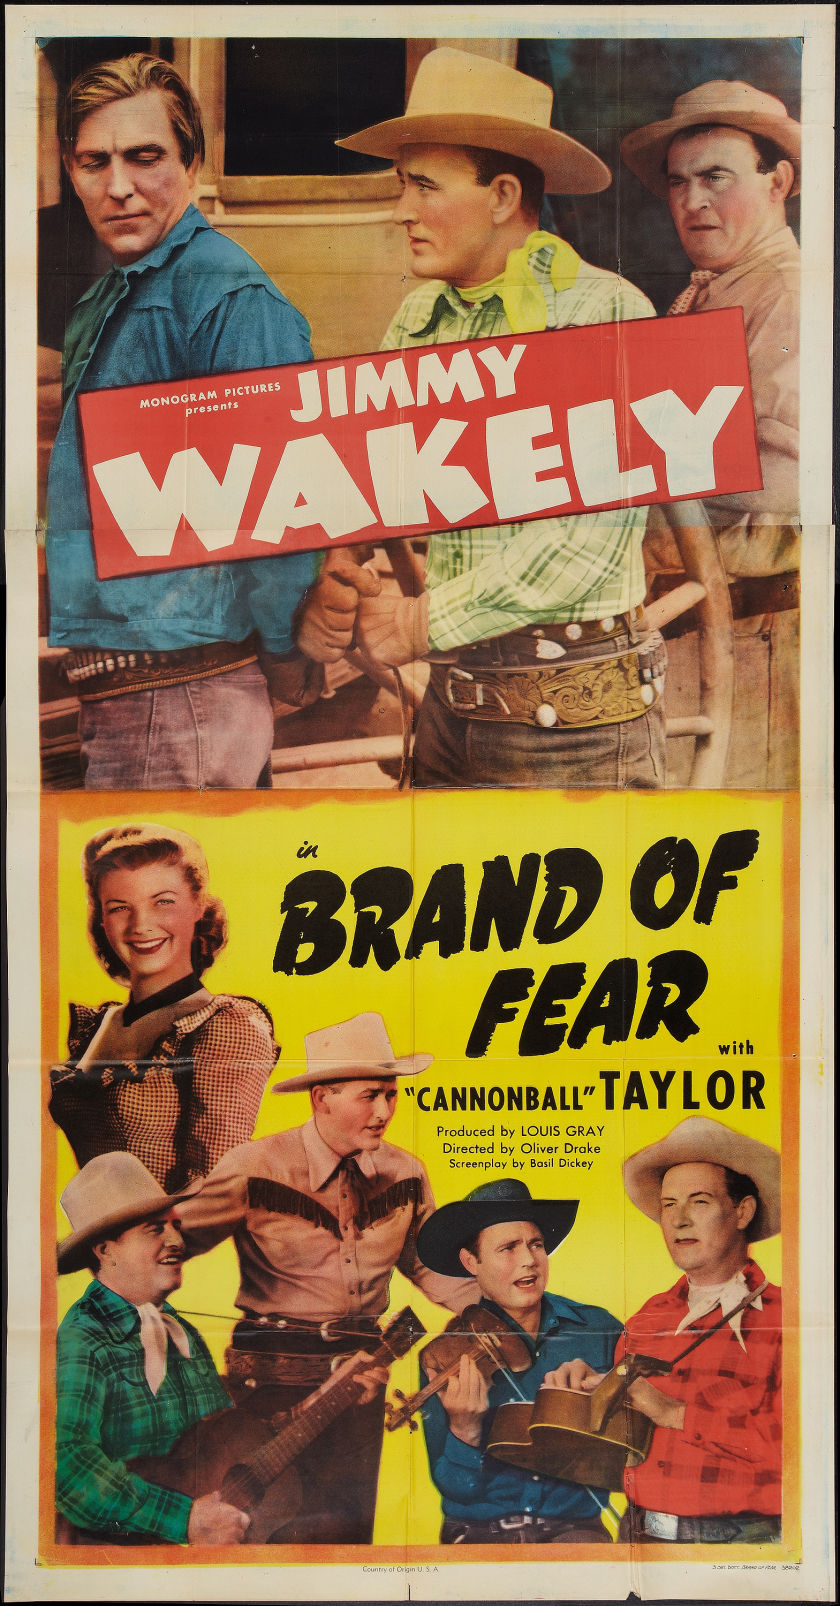 BRAND OF FEAR